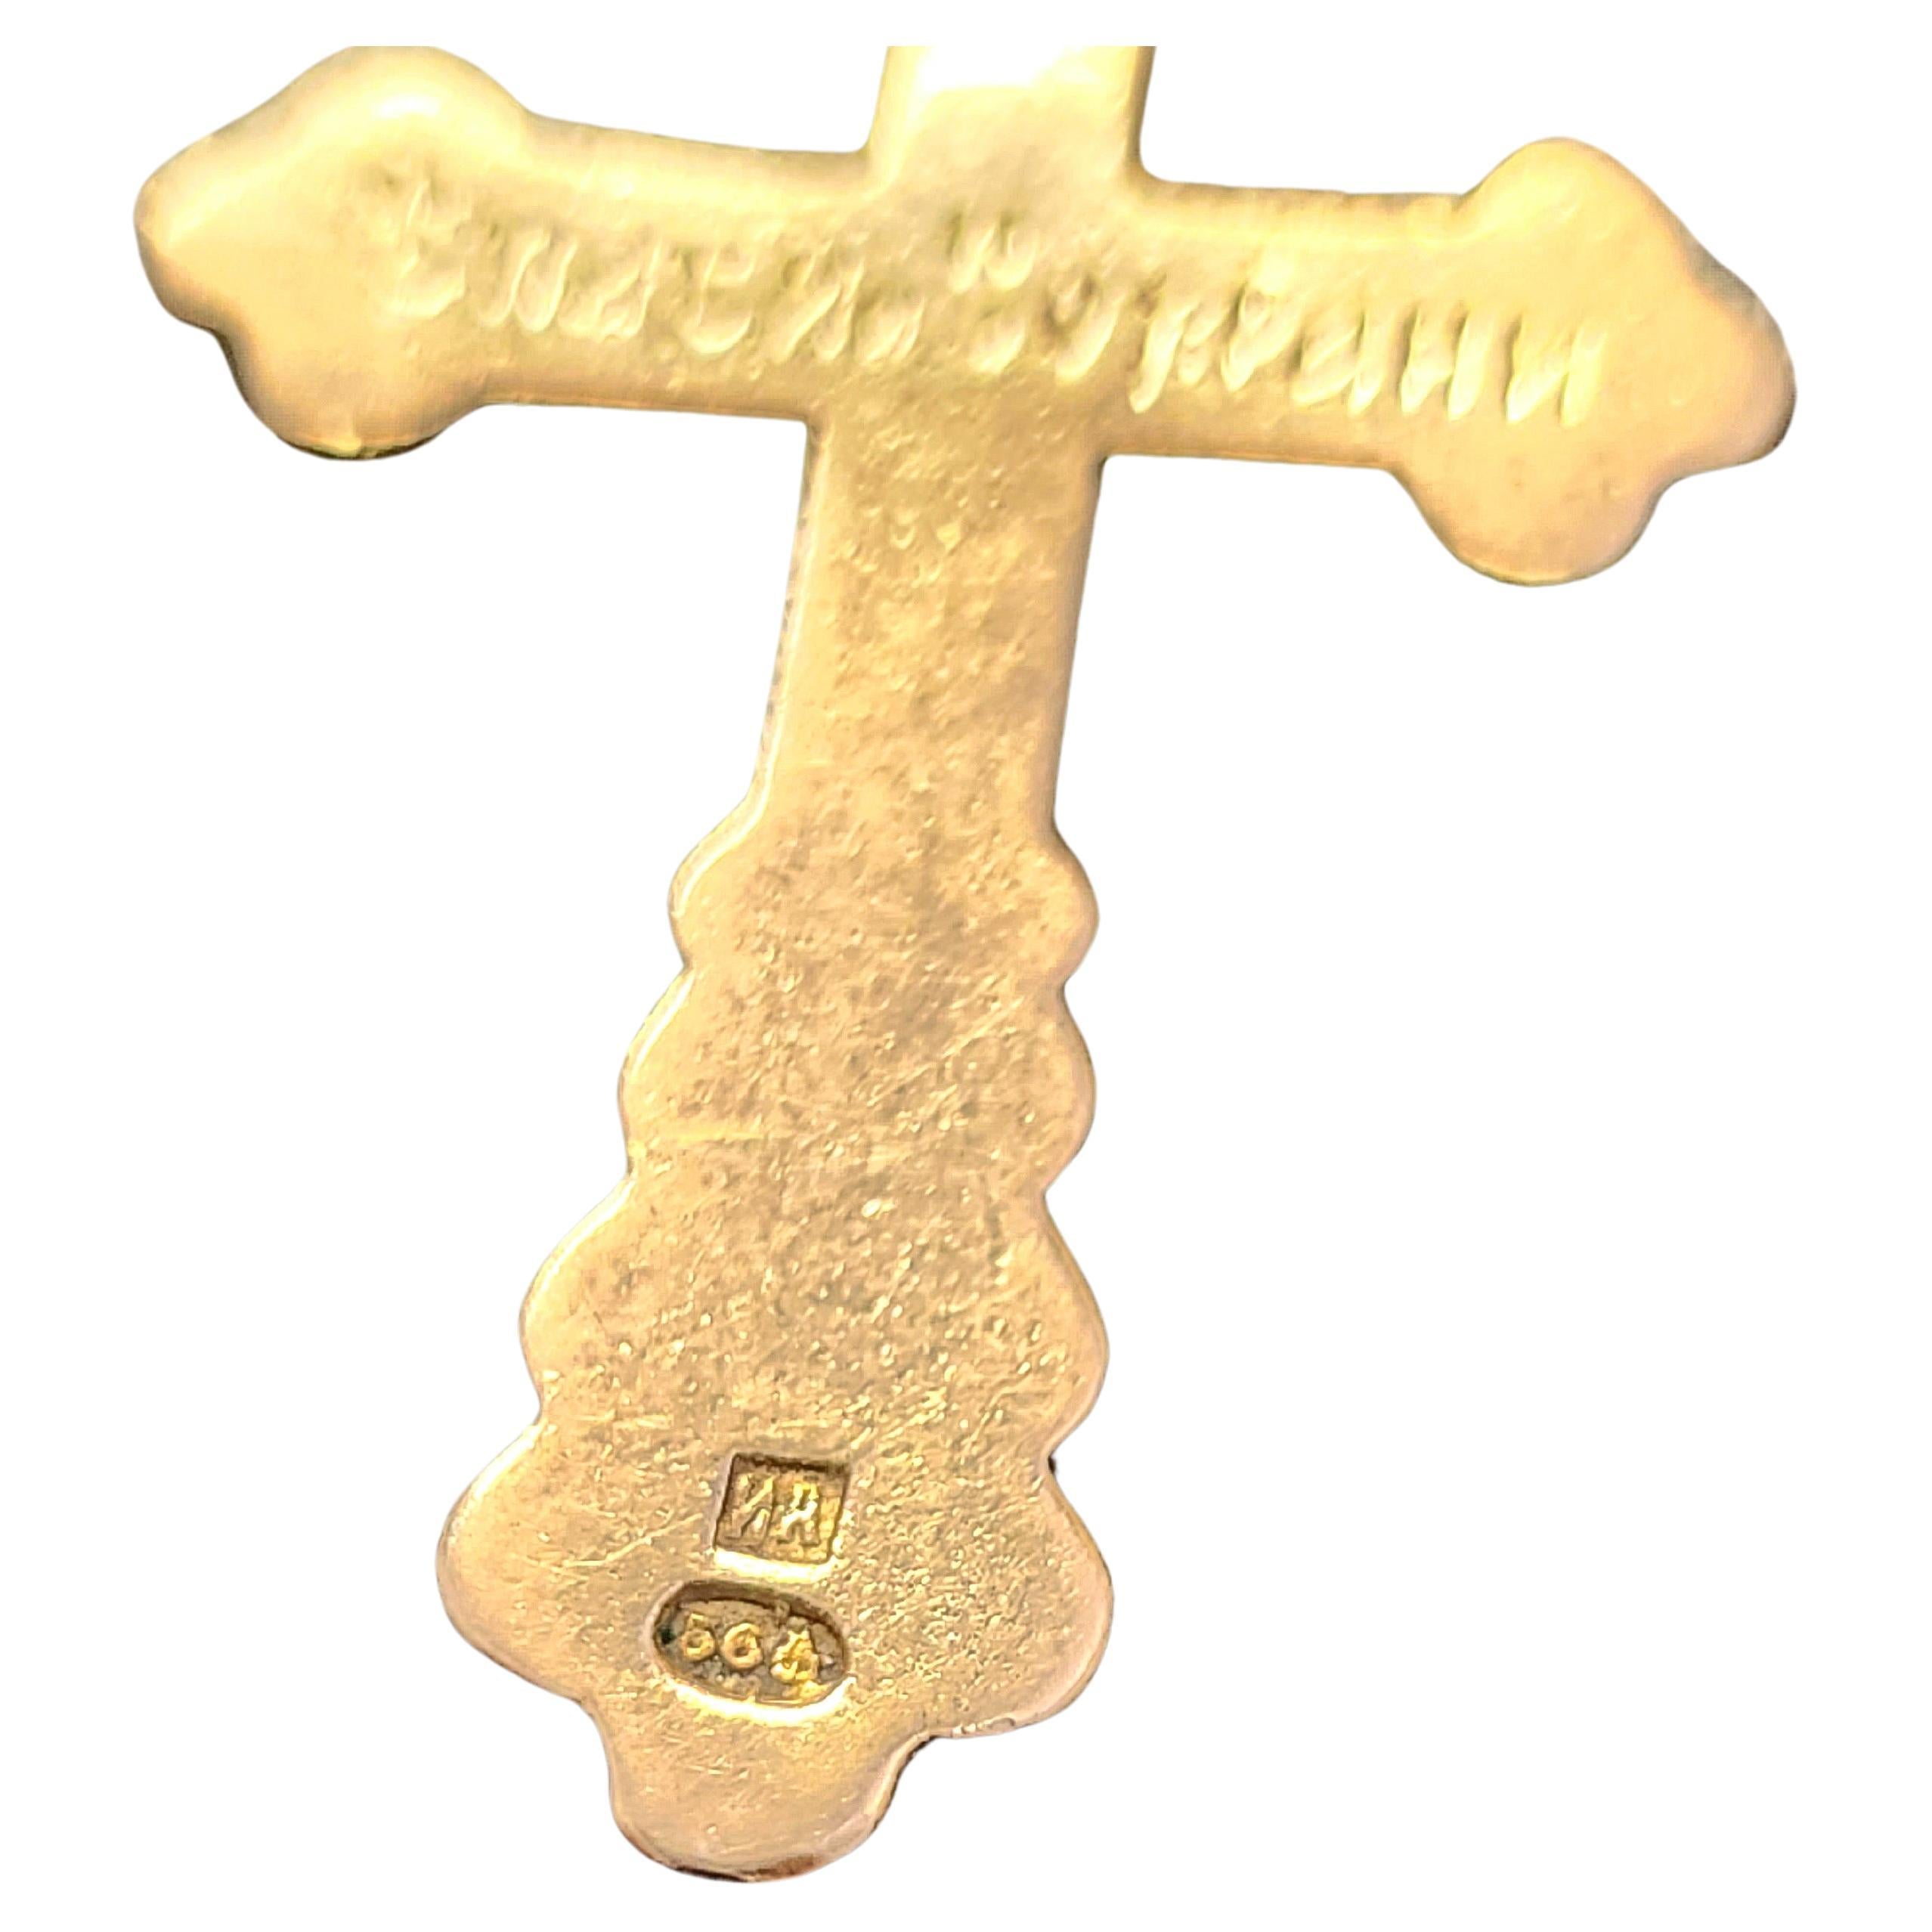 Antique enamel 14k gold cross pendant made during the imperial russian 1904/1907s 4cm lenght engraved on back  (spaci sokrani) or (save and protect) in cyrllic alphabet hall marked 56 imperial russian gold standard and assay mark 